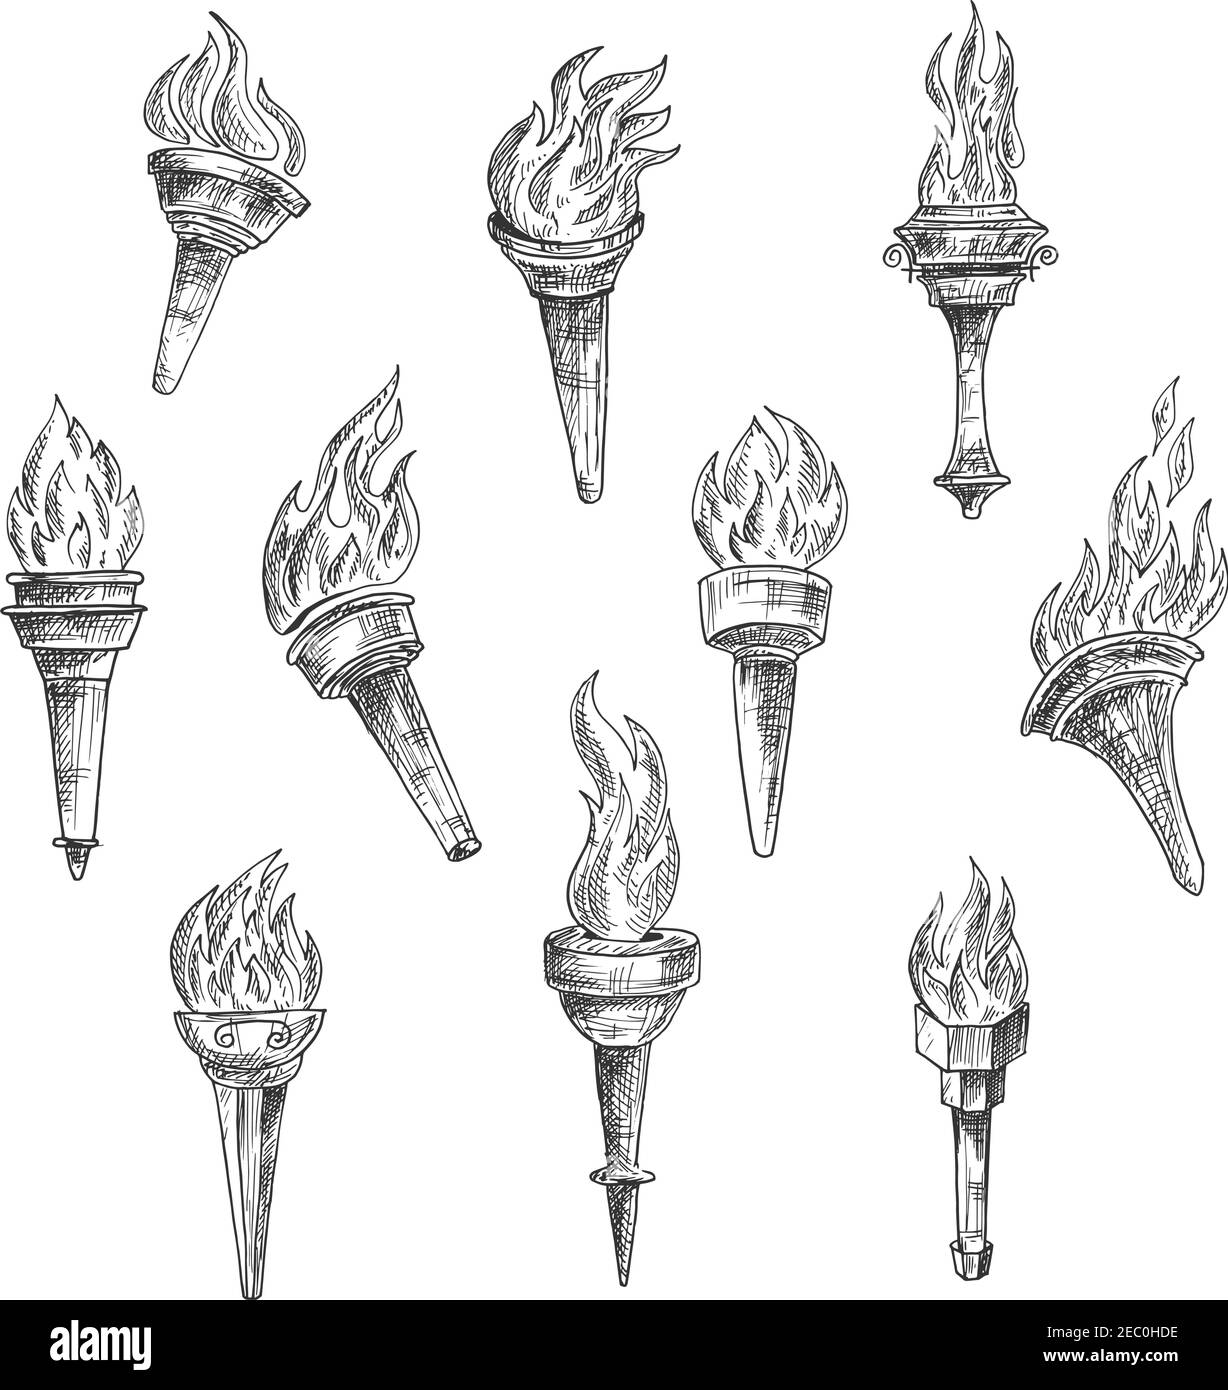 Antique burning torches with curly fire flames in vintage sketch engraving style. Addition to sport, history, religion theme Stock Vector